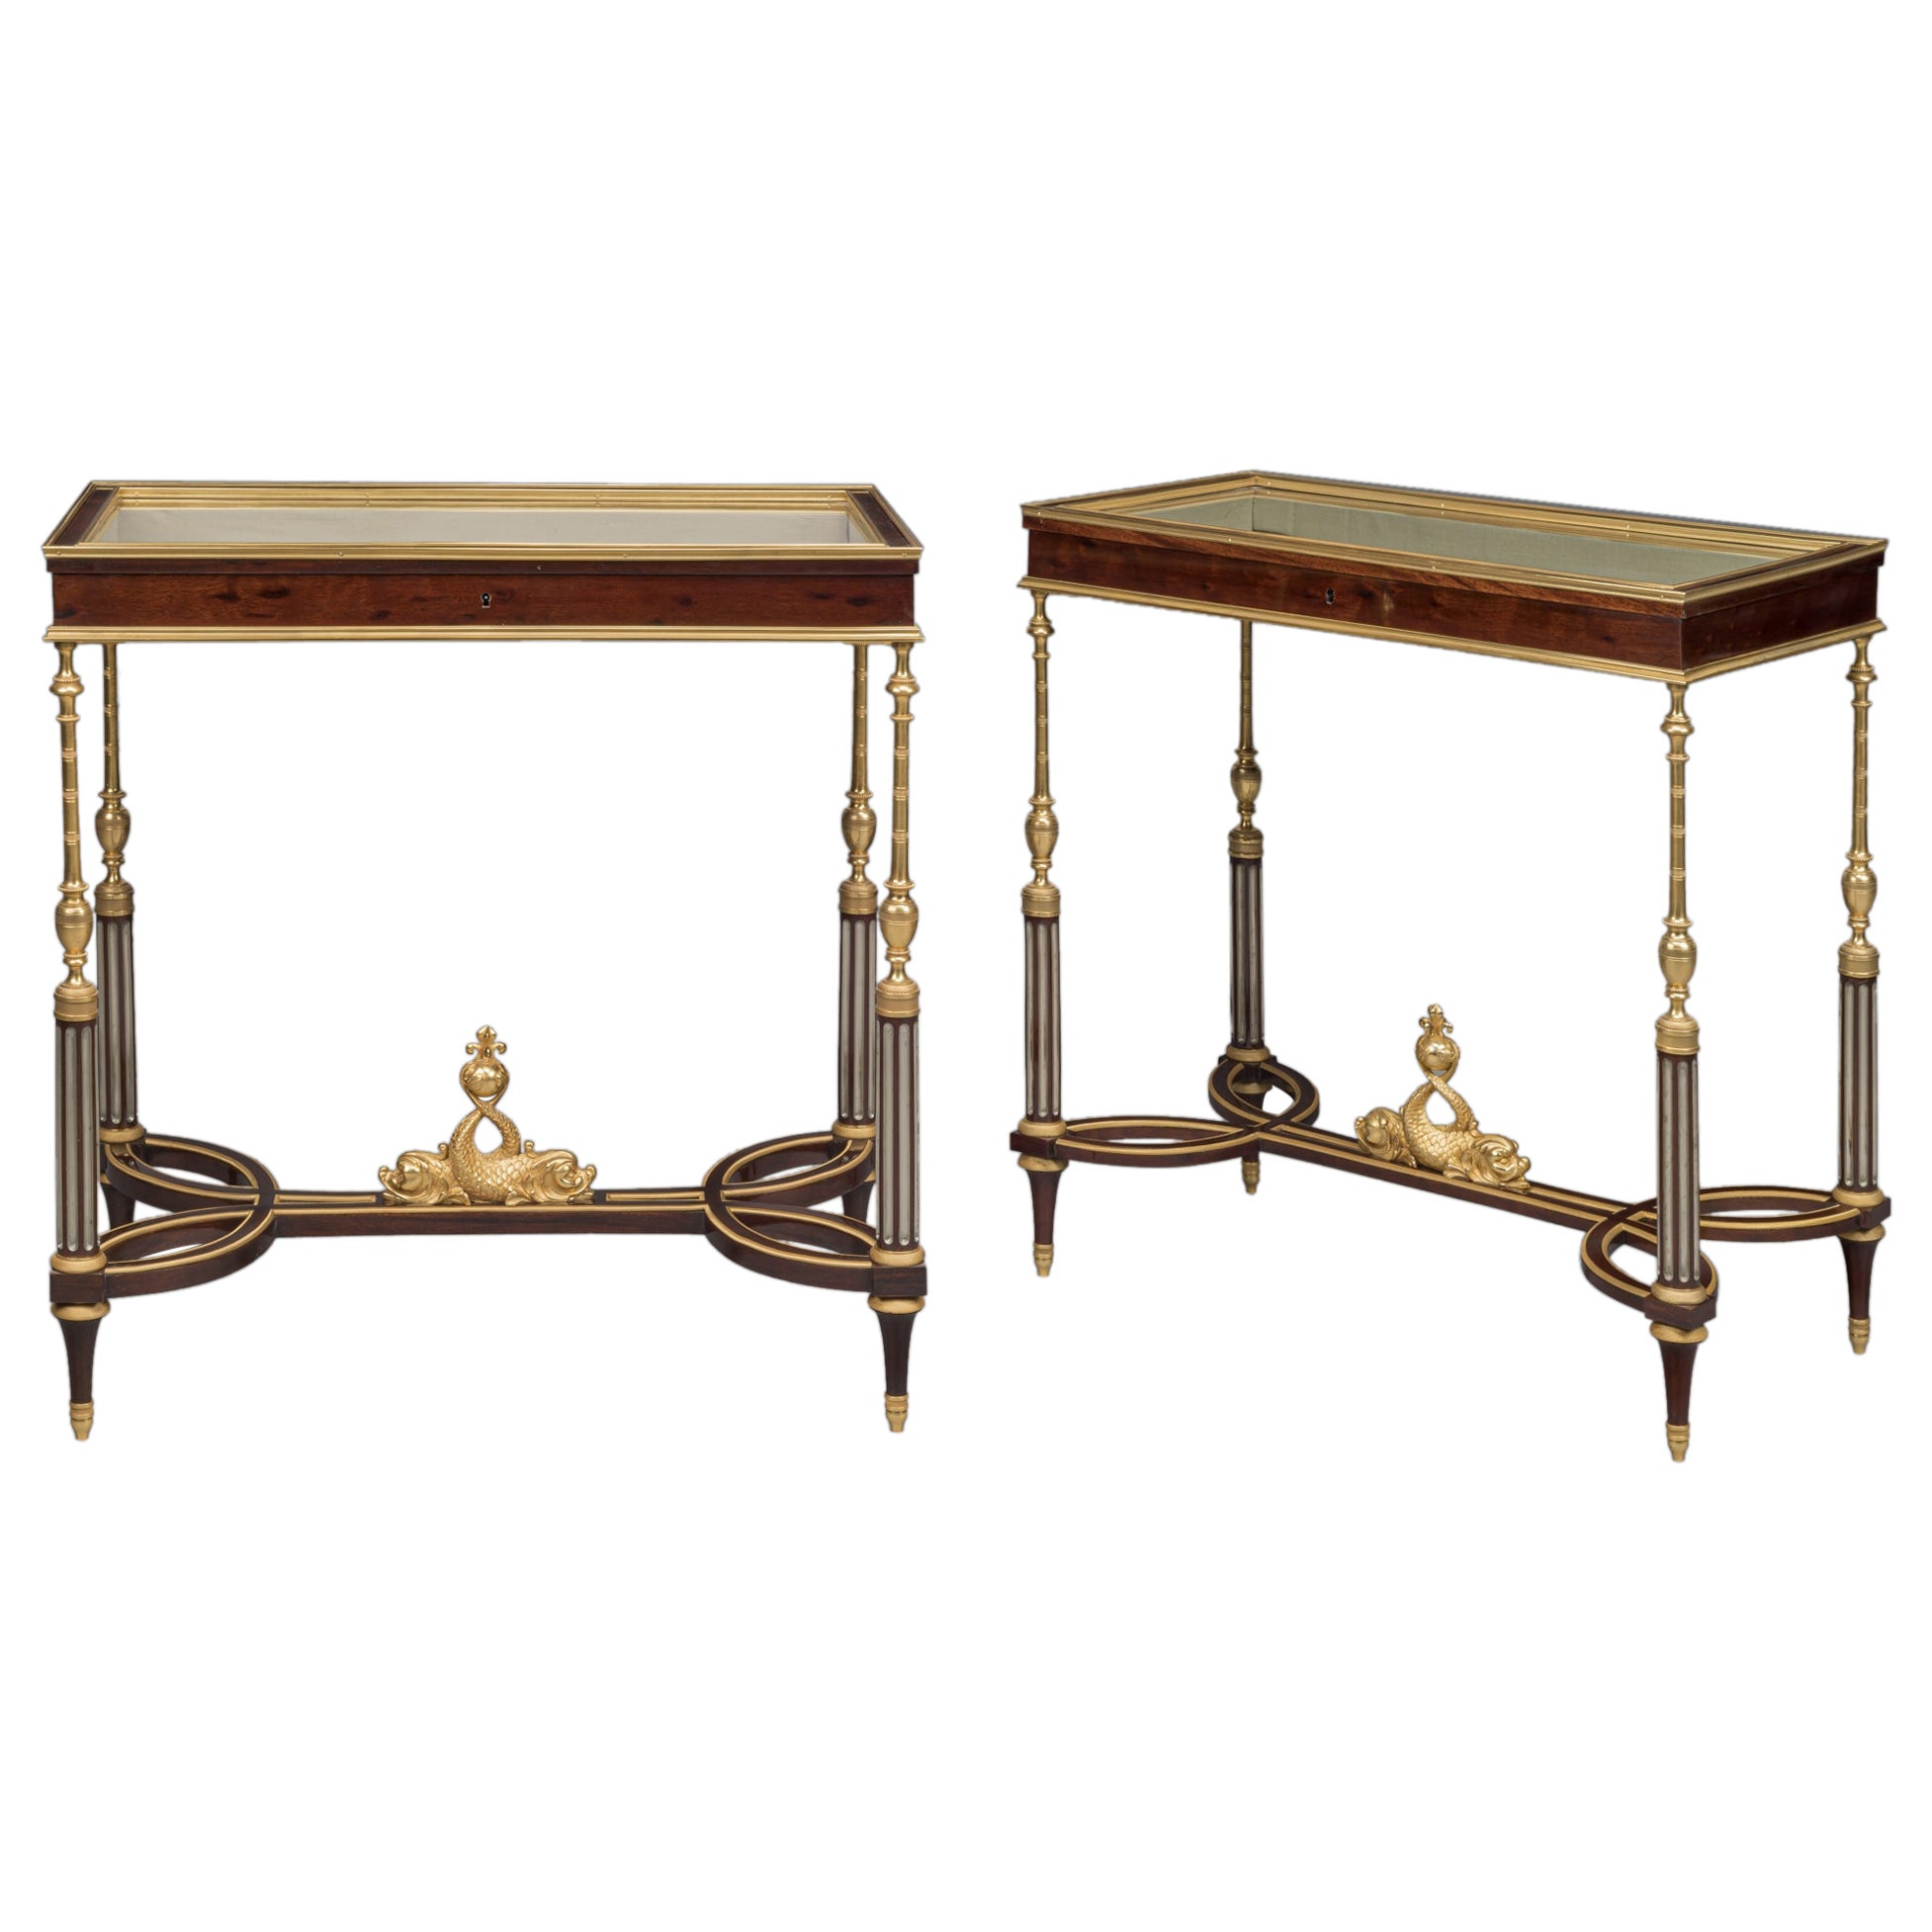 Pair of Louis XVI Style Gilt-Bronze Mounted Vitrine Tables For Sale